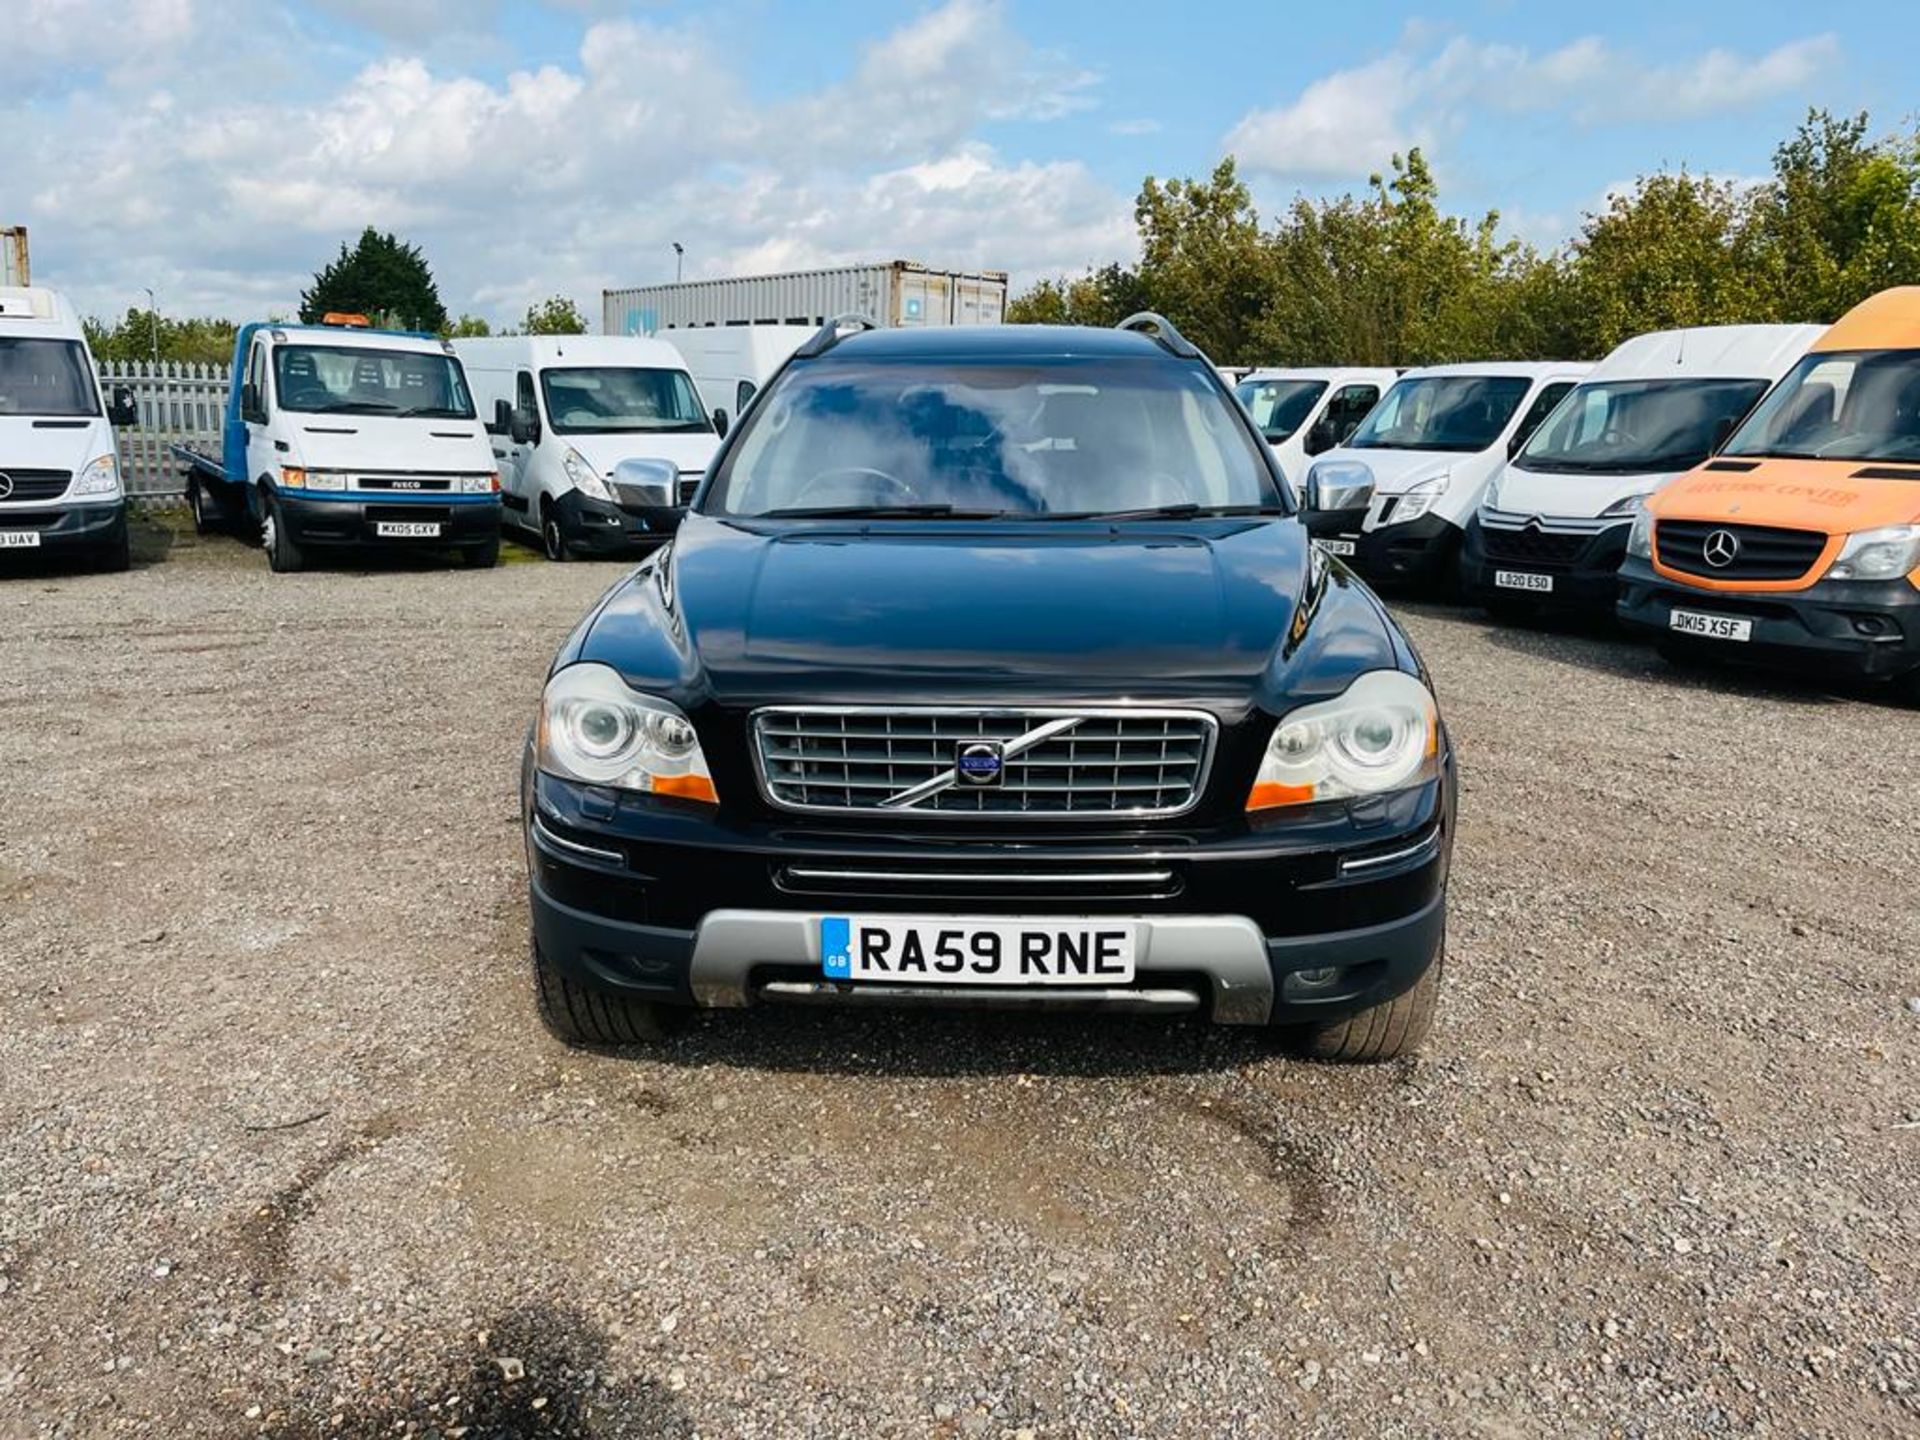 ** ON SALE ** Volvo XC90 2.4 D5 185 Executive G/T Estate 2009 '59 plate' - Climate Control - No Vat - Image 14 of 30